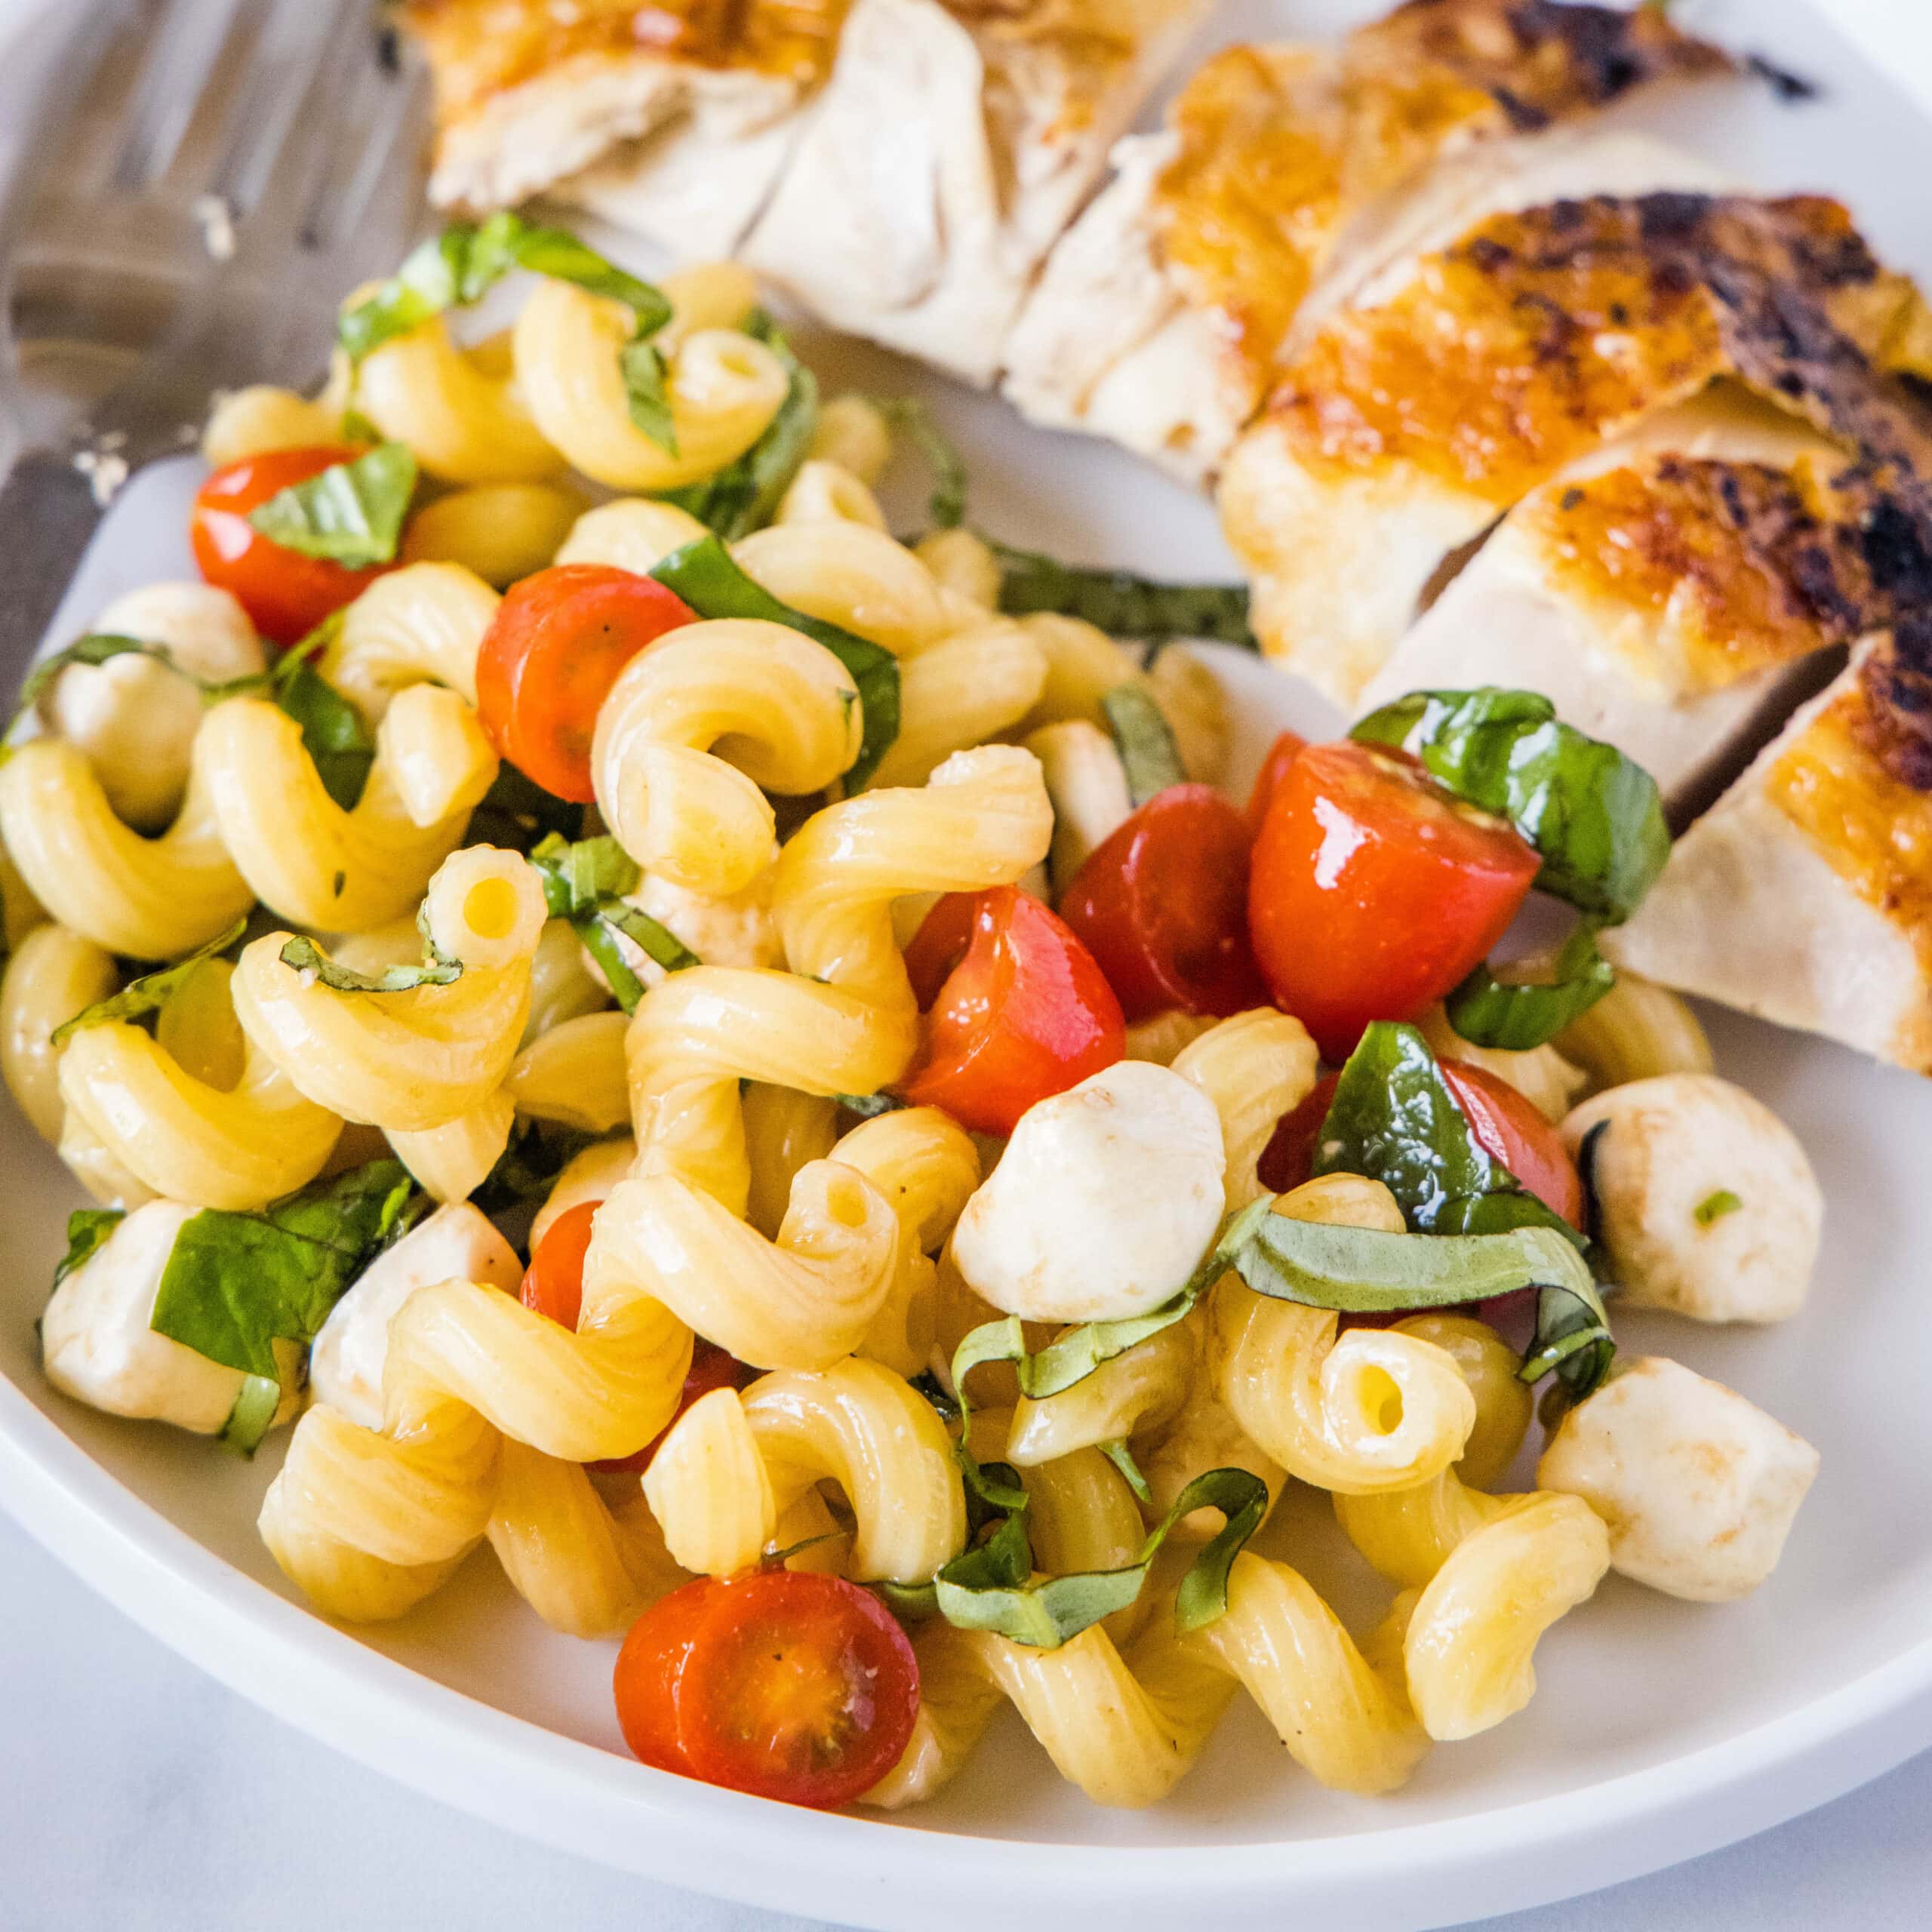 cropped in close up of pasta salad next to a piece of chicken